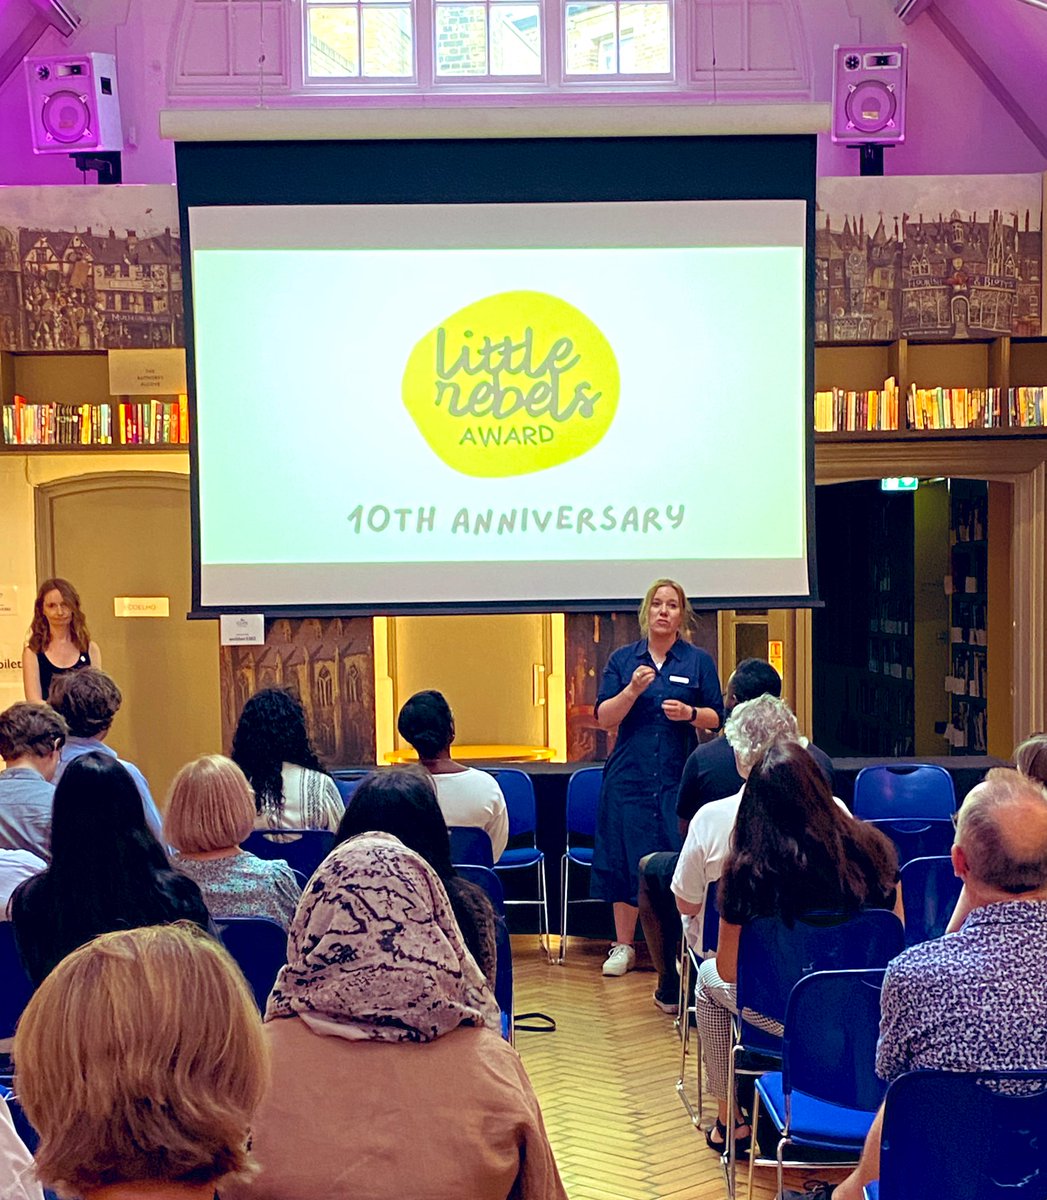 And we’re off! We @clpe1 ❤️the @littlerebsprize and we are proud that they have chosen our Literacy Library as the place to announce this year’s winner - as @charliehacking says “it’s an award that supports the books that grow children’s hearts and minds”